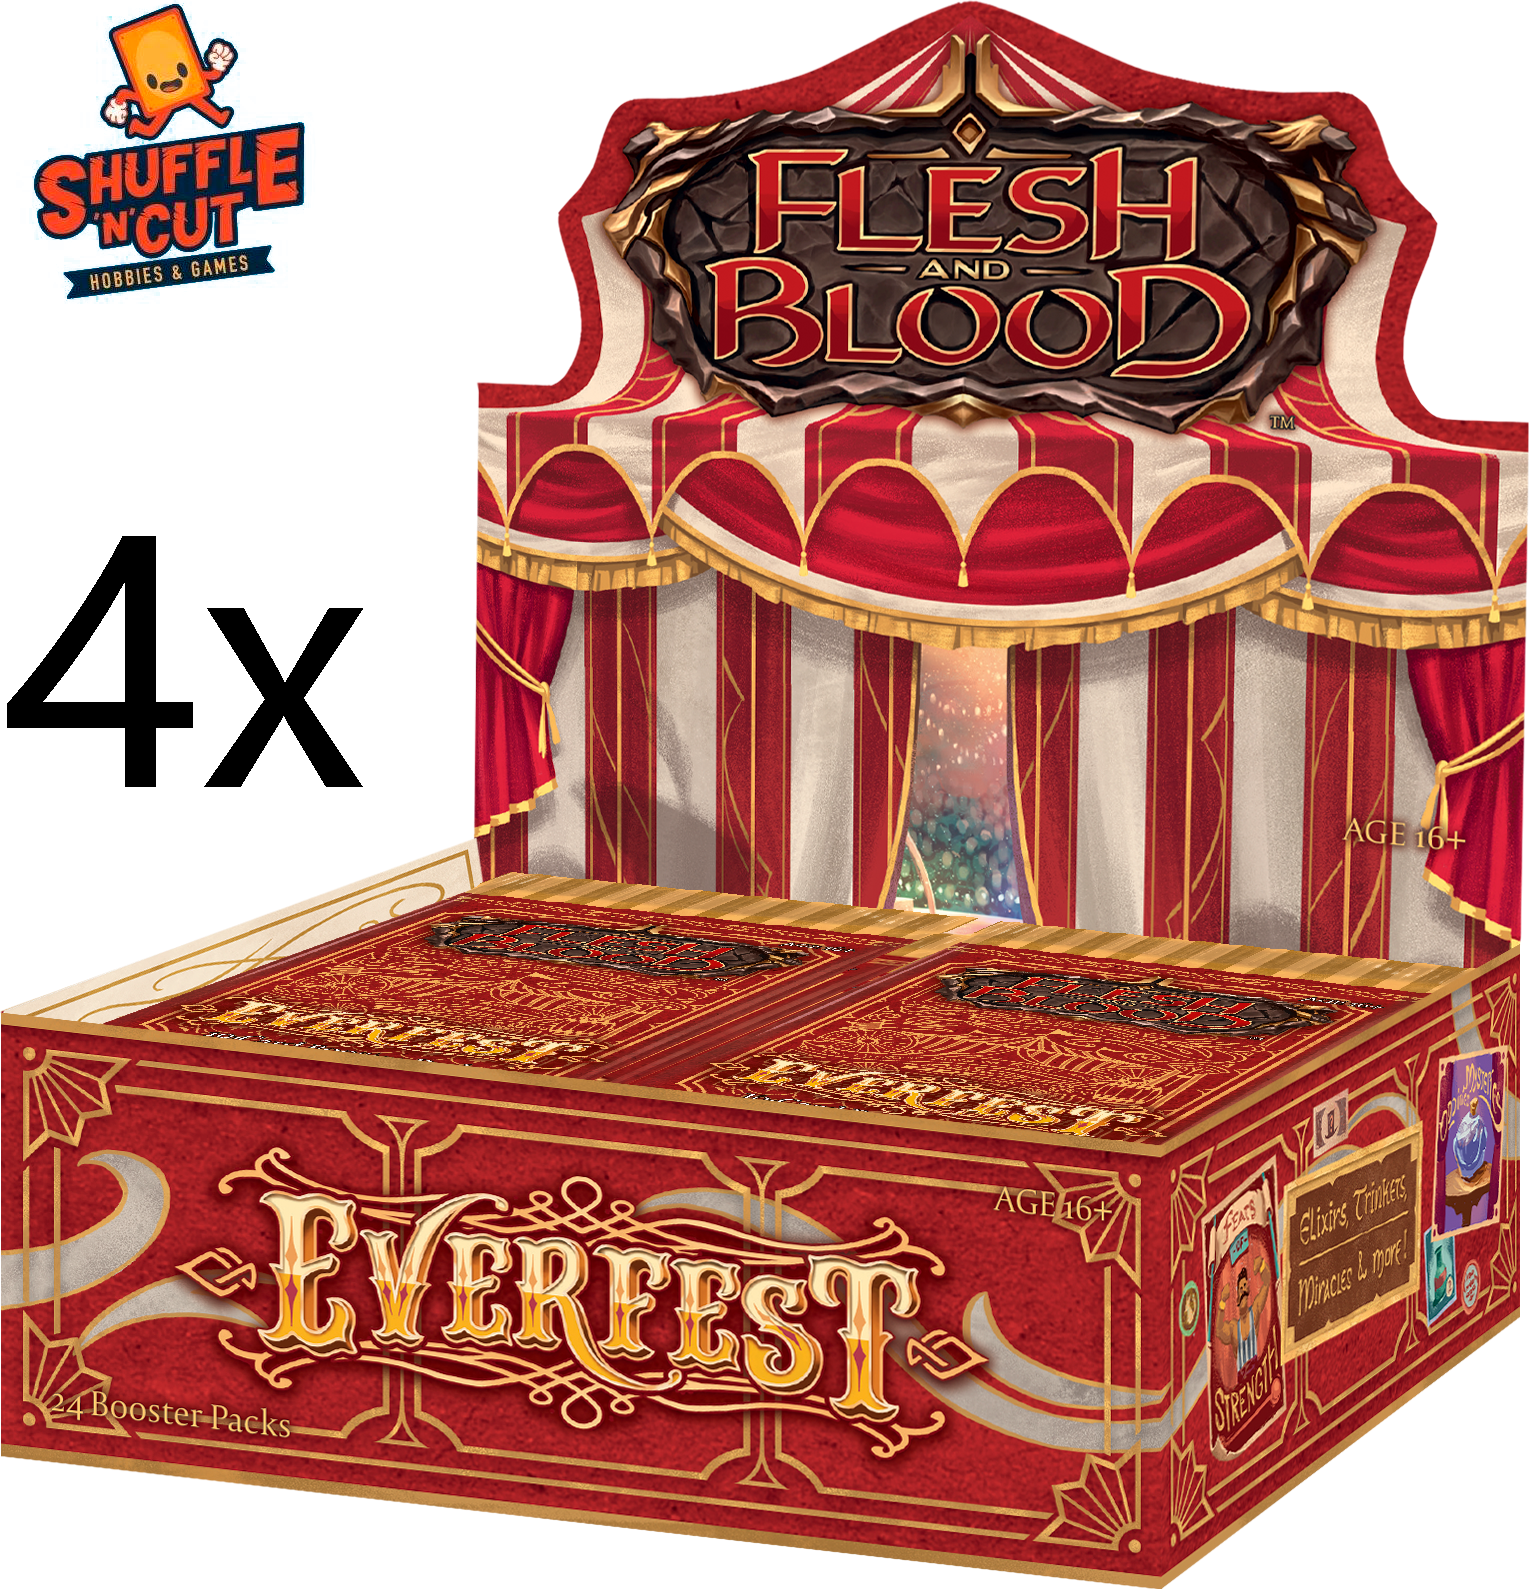 Flesh and Blood : Everfest Booster Case - First Edition | Shuffle n Cut Hobbies & Games